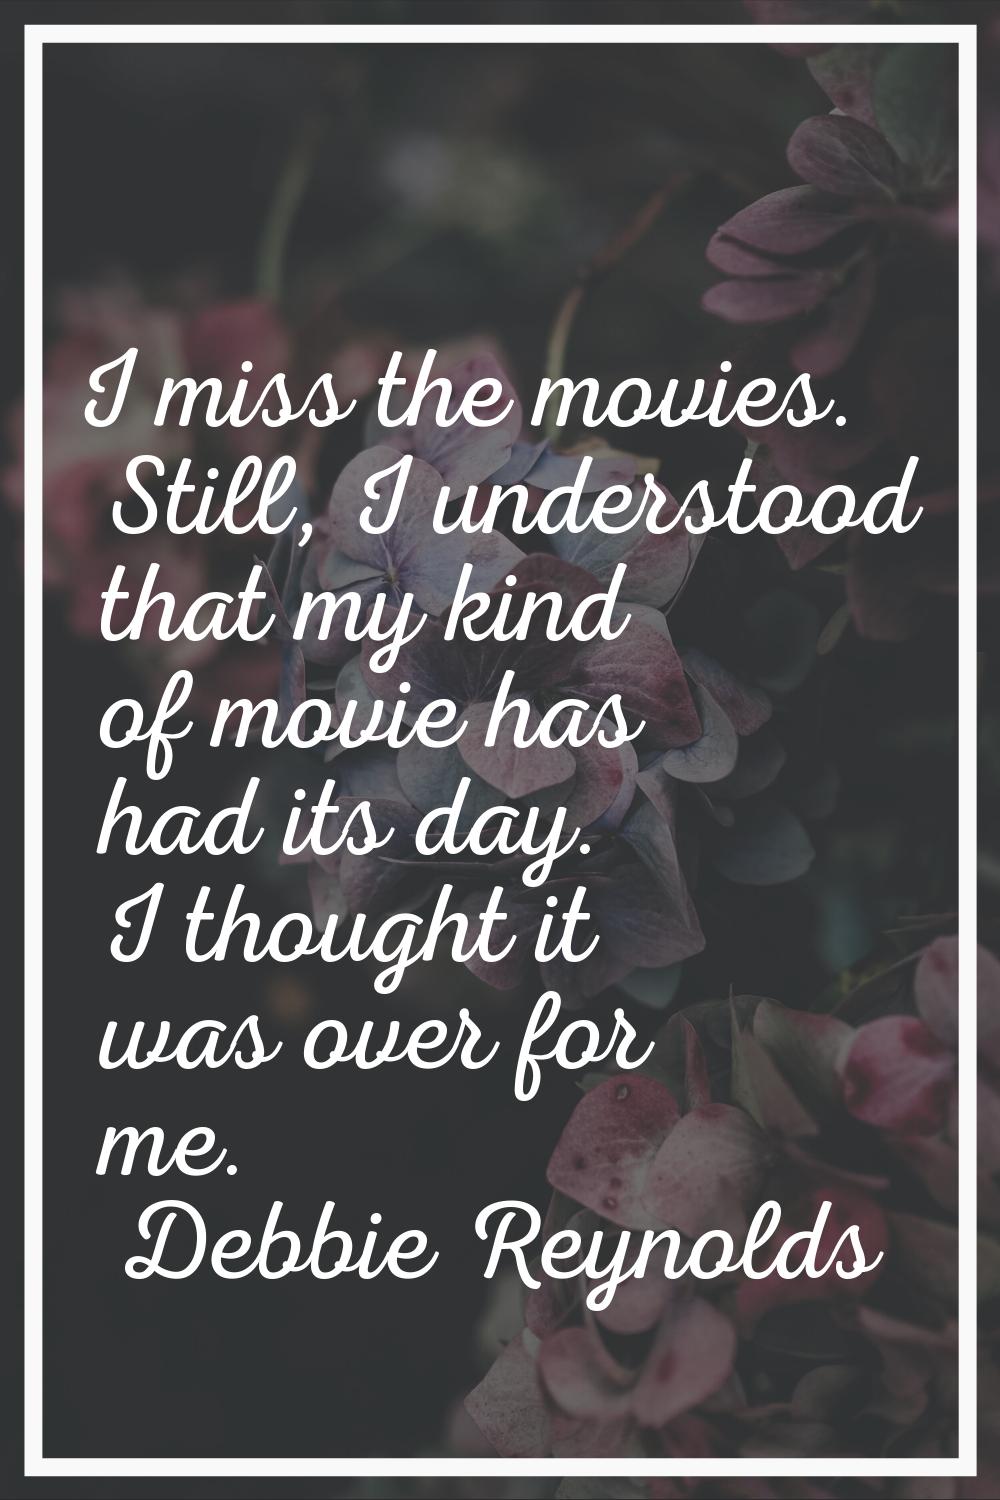 I miss the movies. Still, I understood that my kind of movie has had its day. I thought it was over